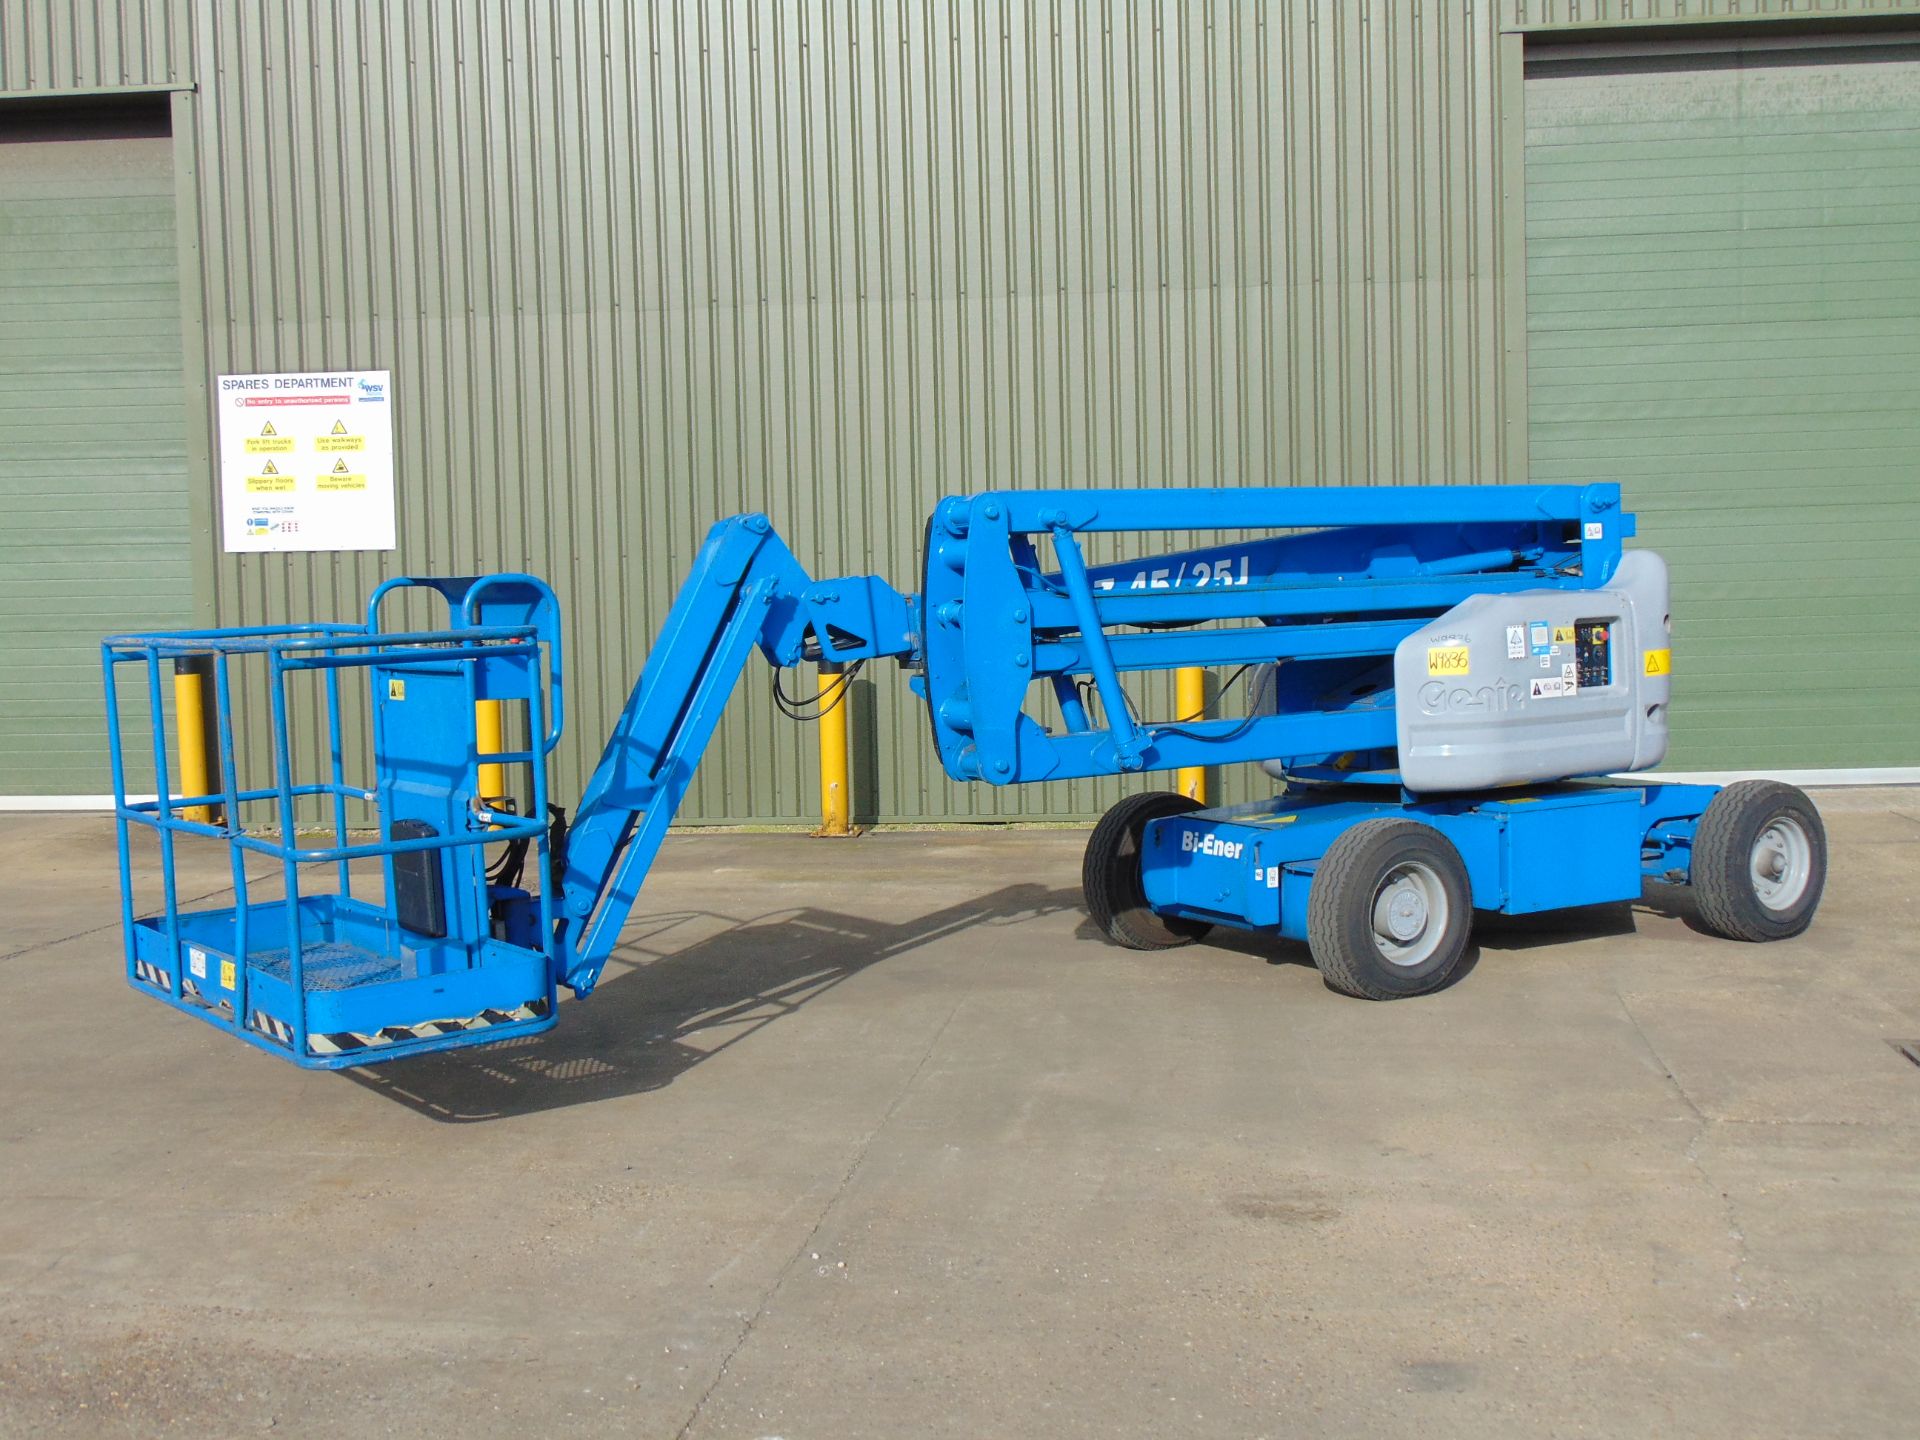 2005 Genie Z45-25J Diesel Articulated Boom Lift ONLY 775 HOURS - Image 11 of 24